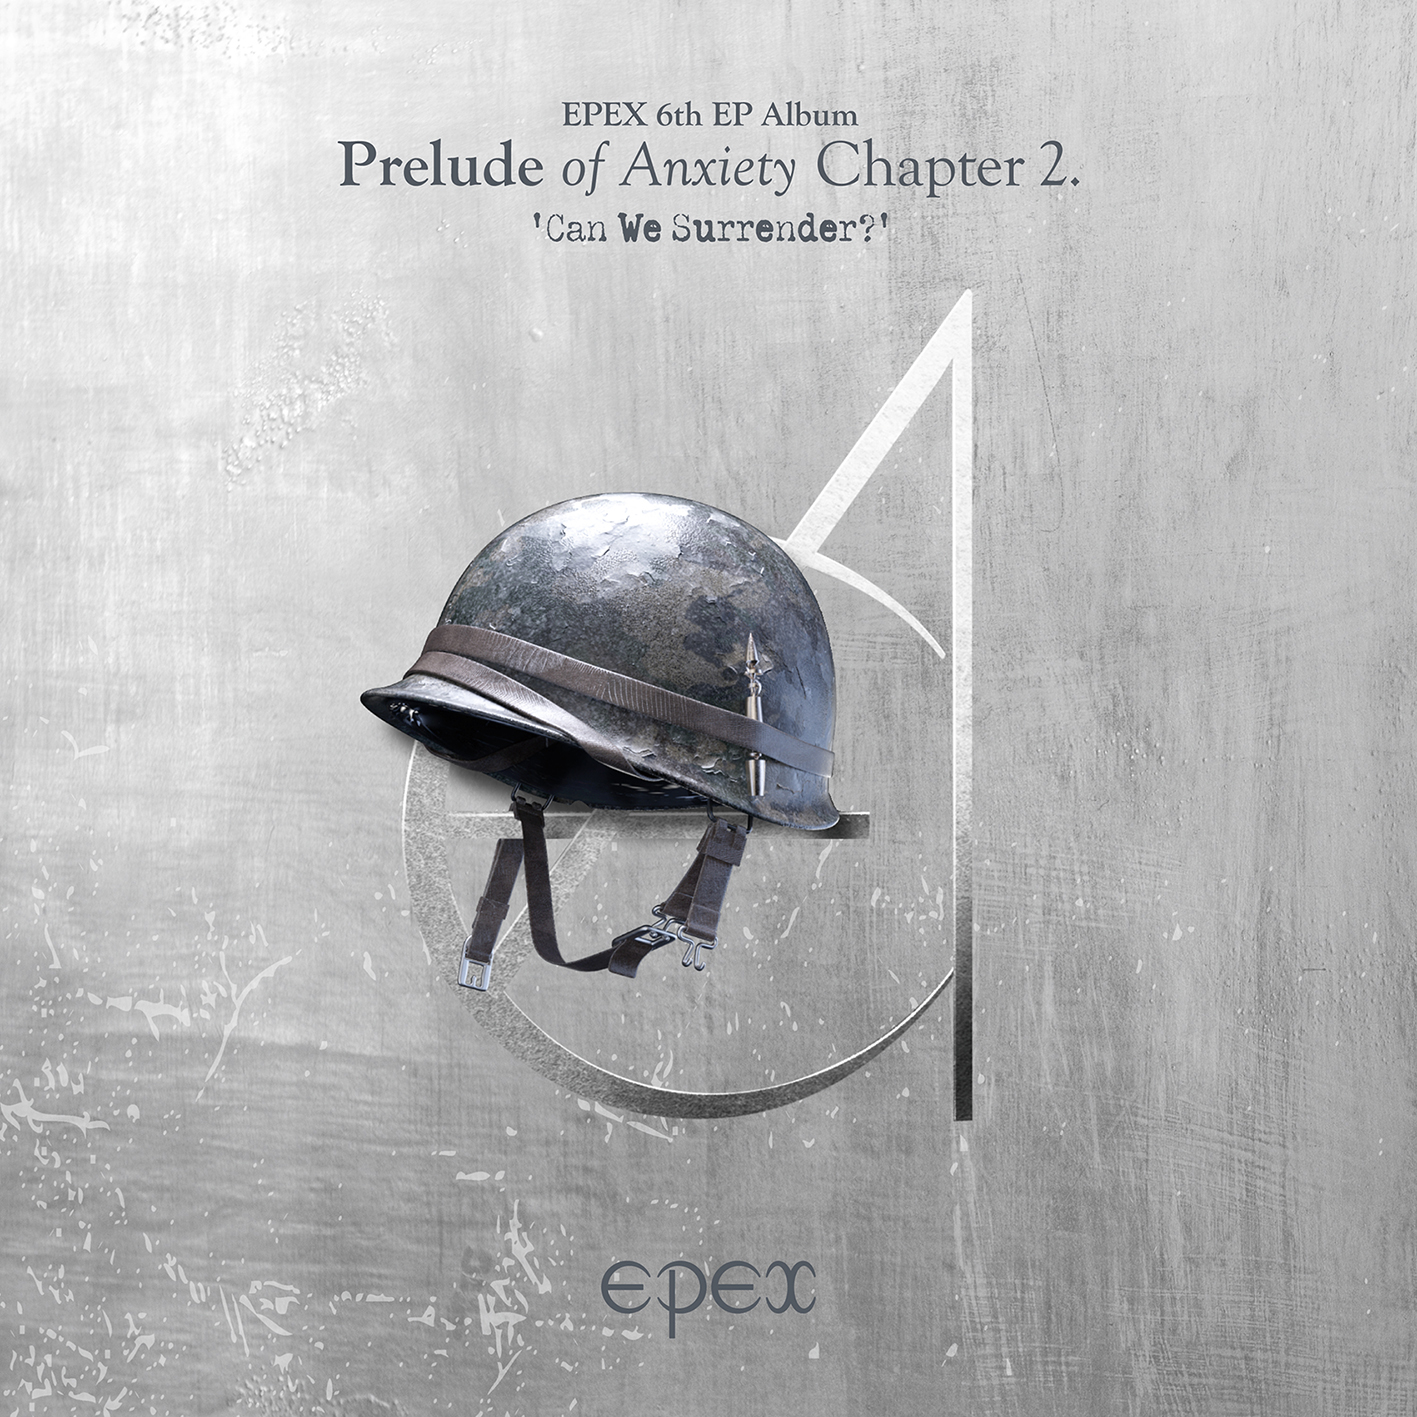 EPEX 6th EP Album Prelude of Anxiety Chapter 2. ‘Can We Surrender?’ 